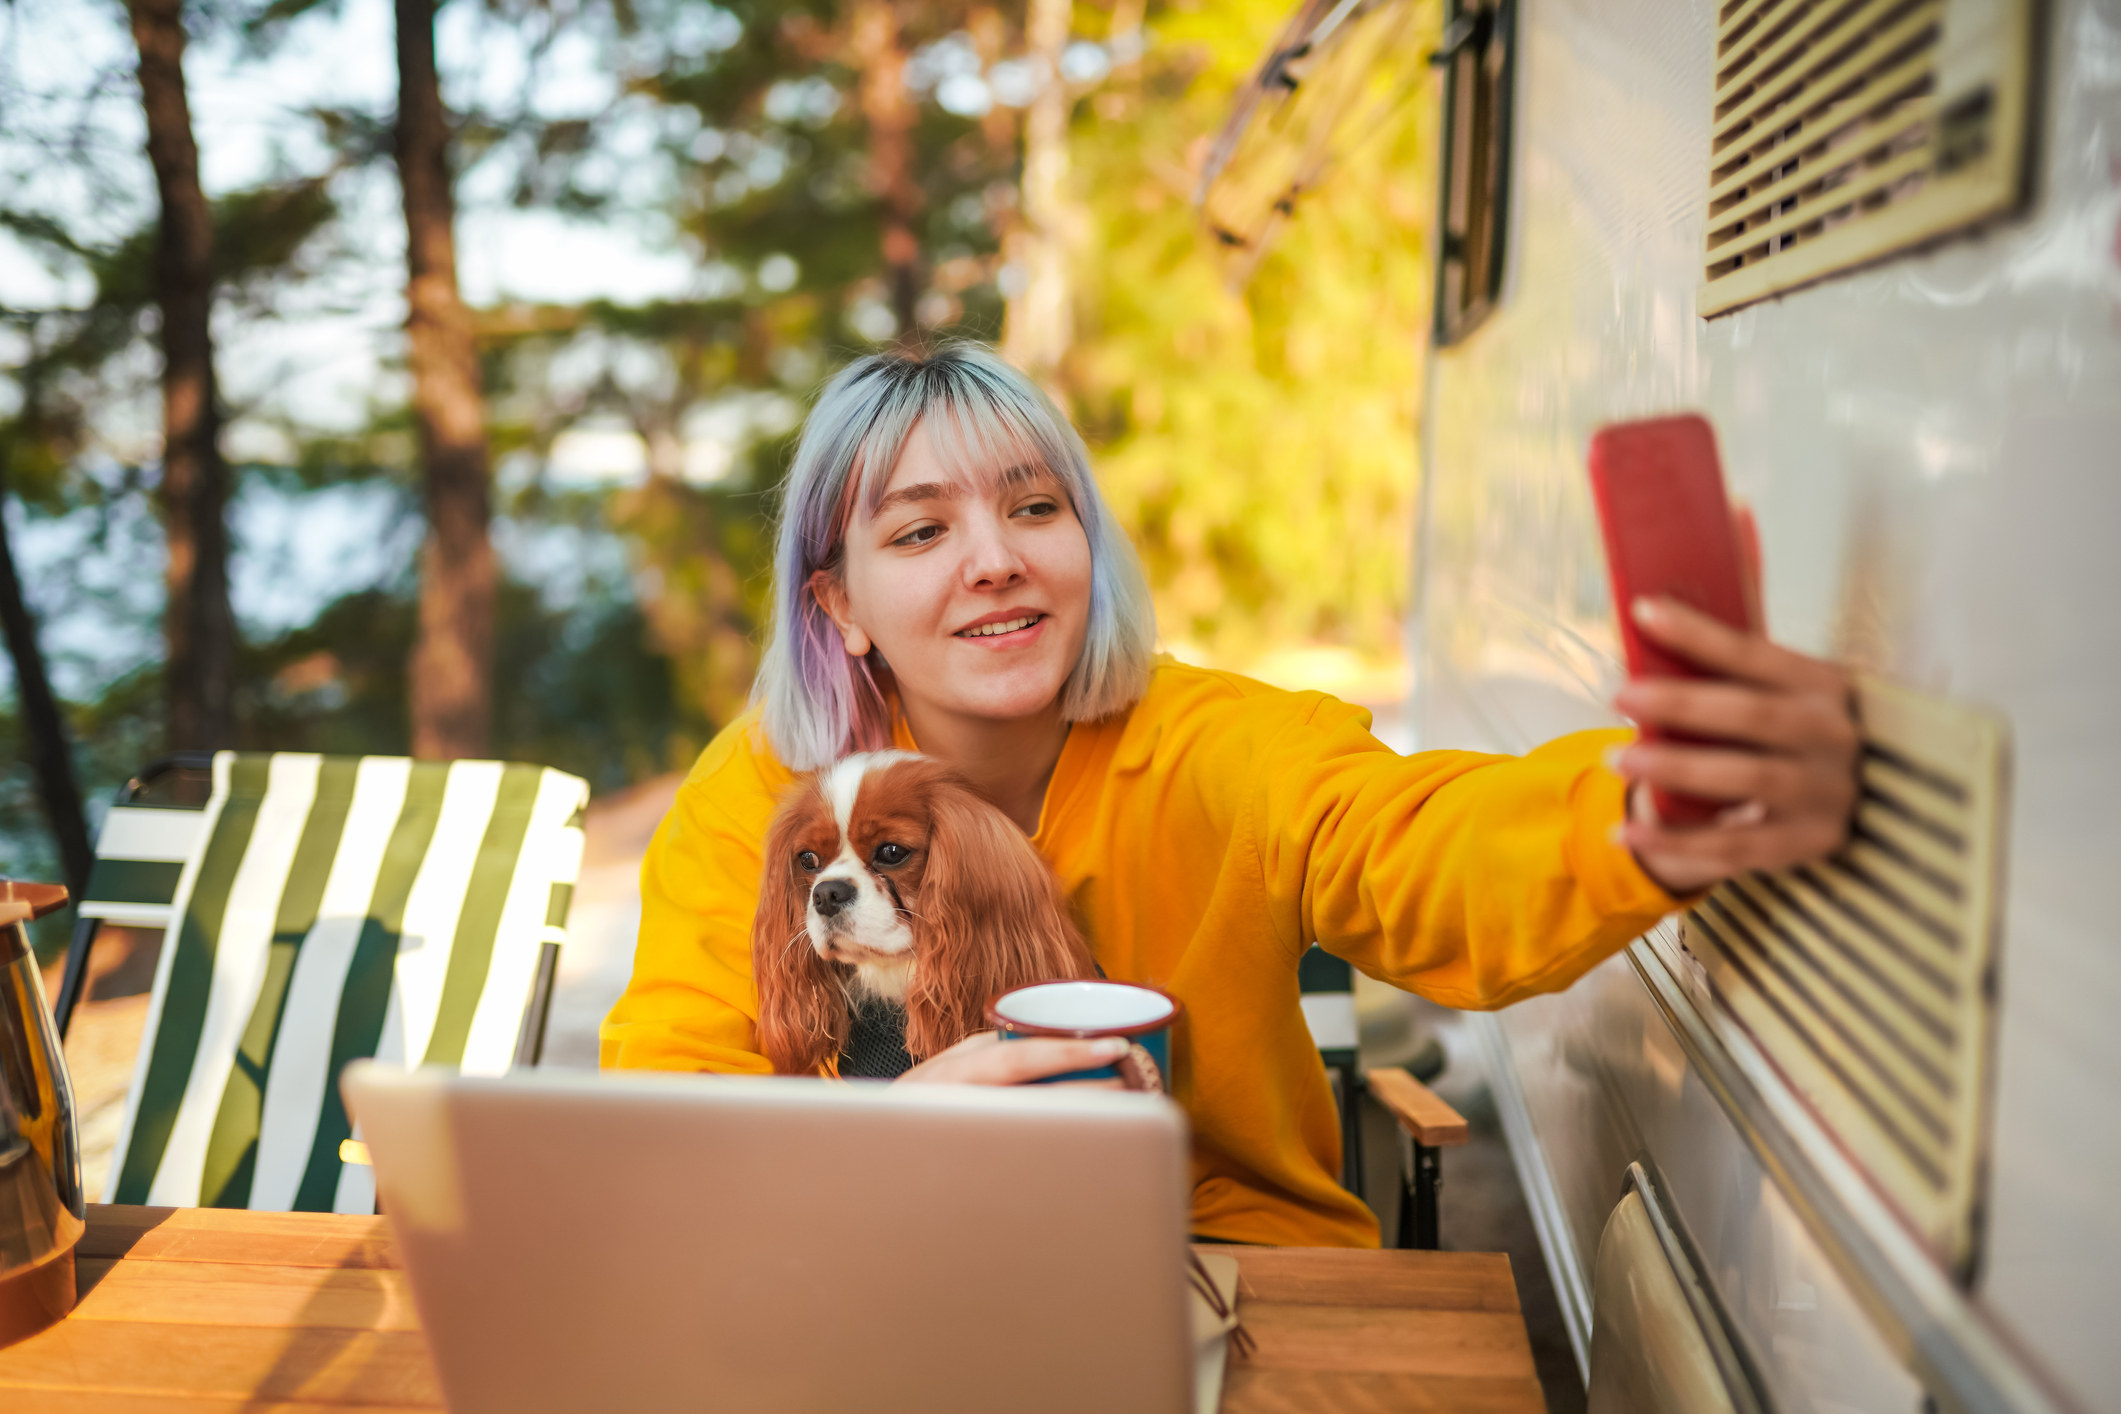 Woman sitting next to a camper with her dog. She is on her phone and computer